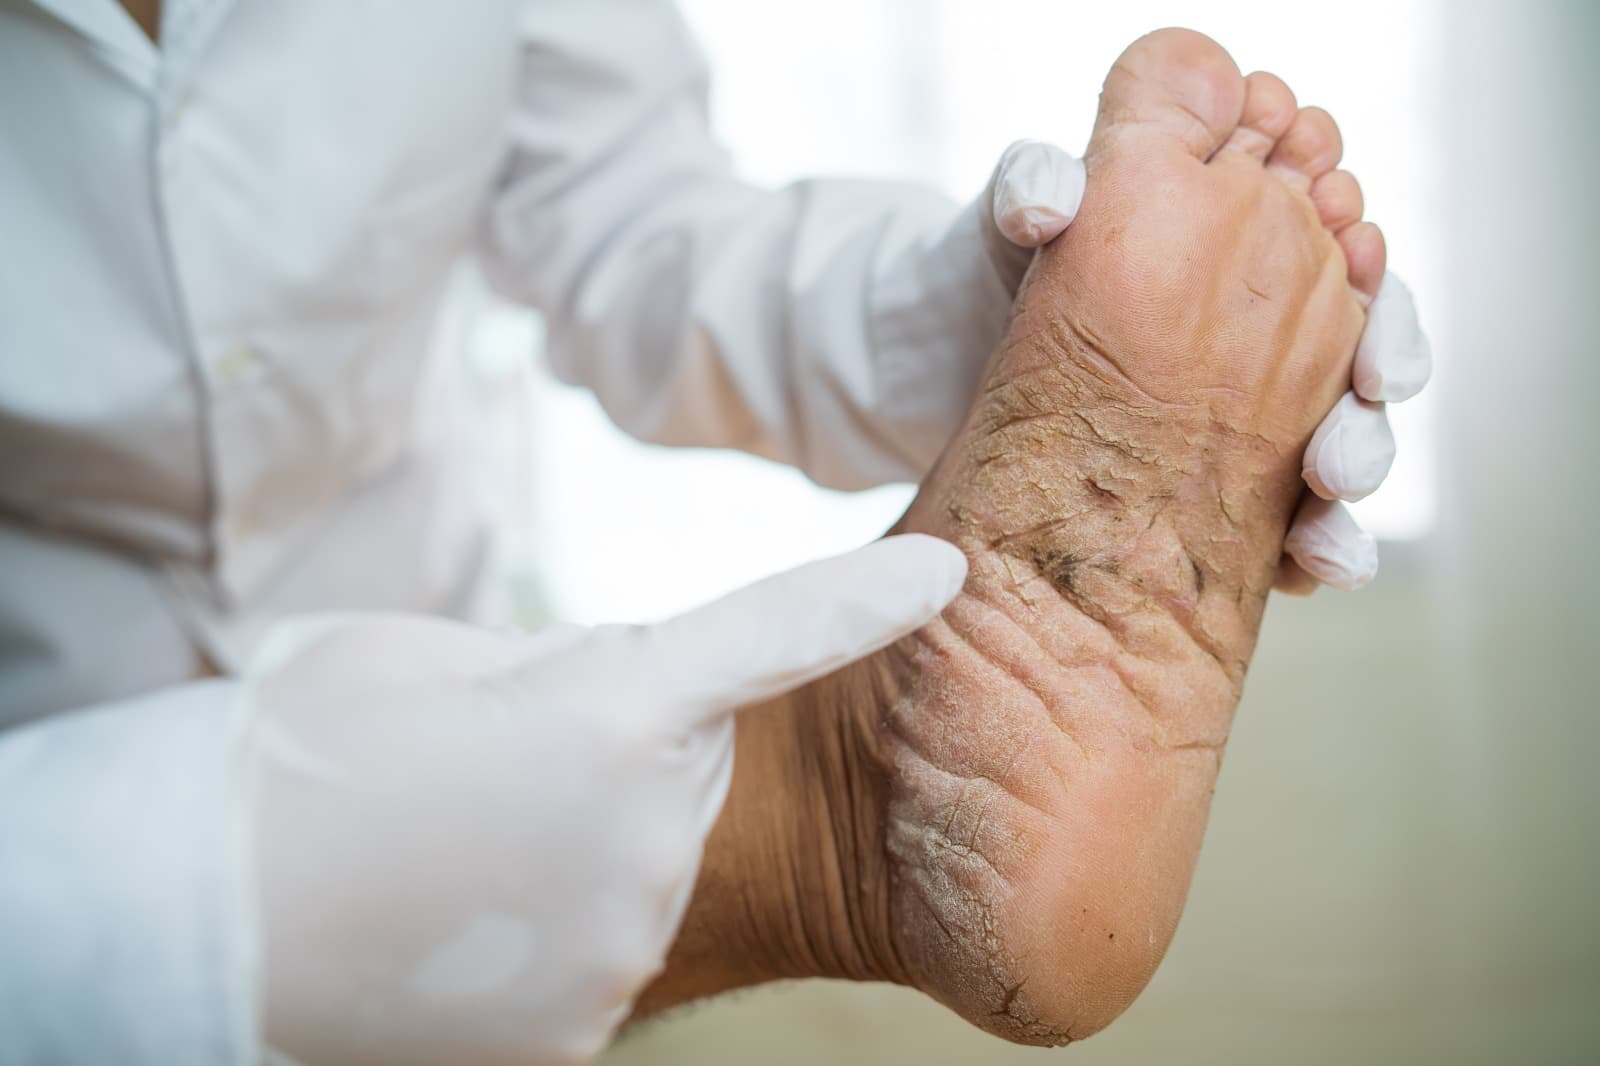 Essential foot care tips for people with diabetes